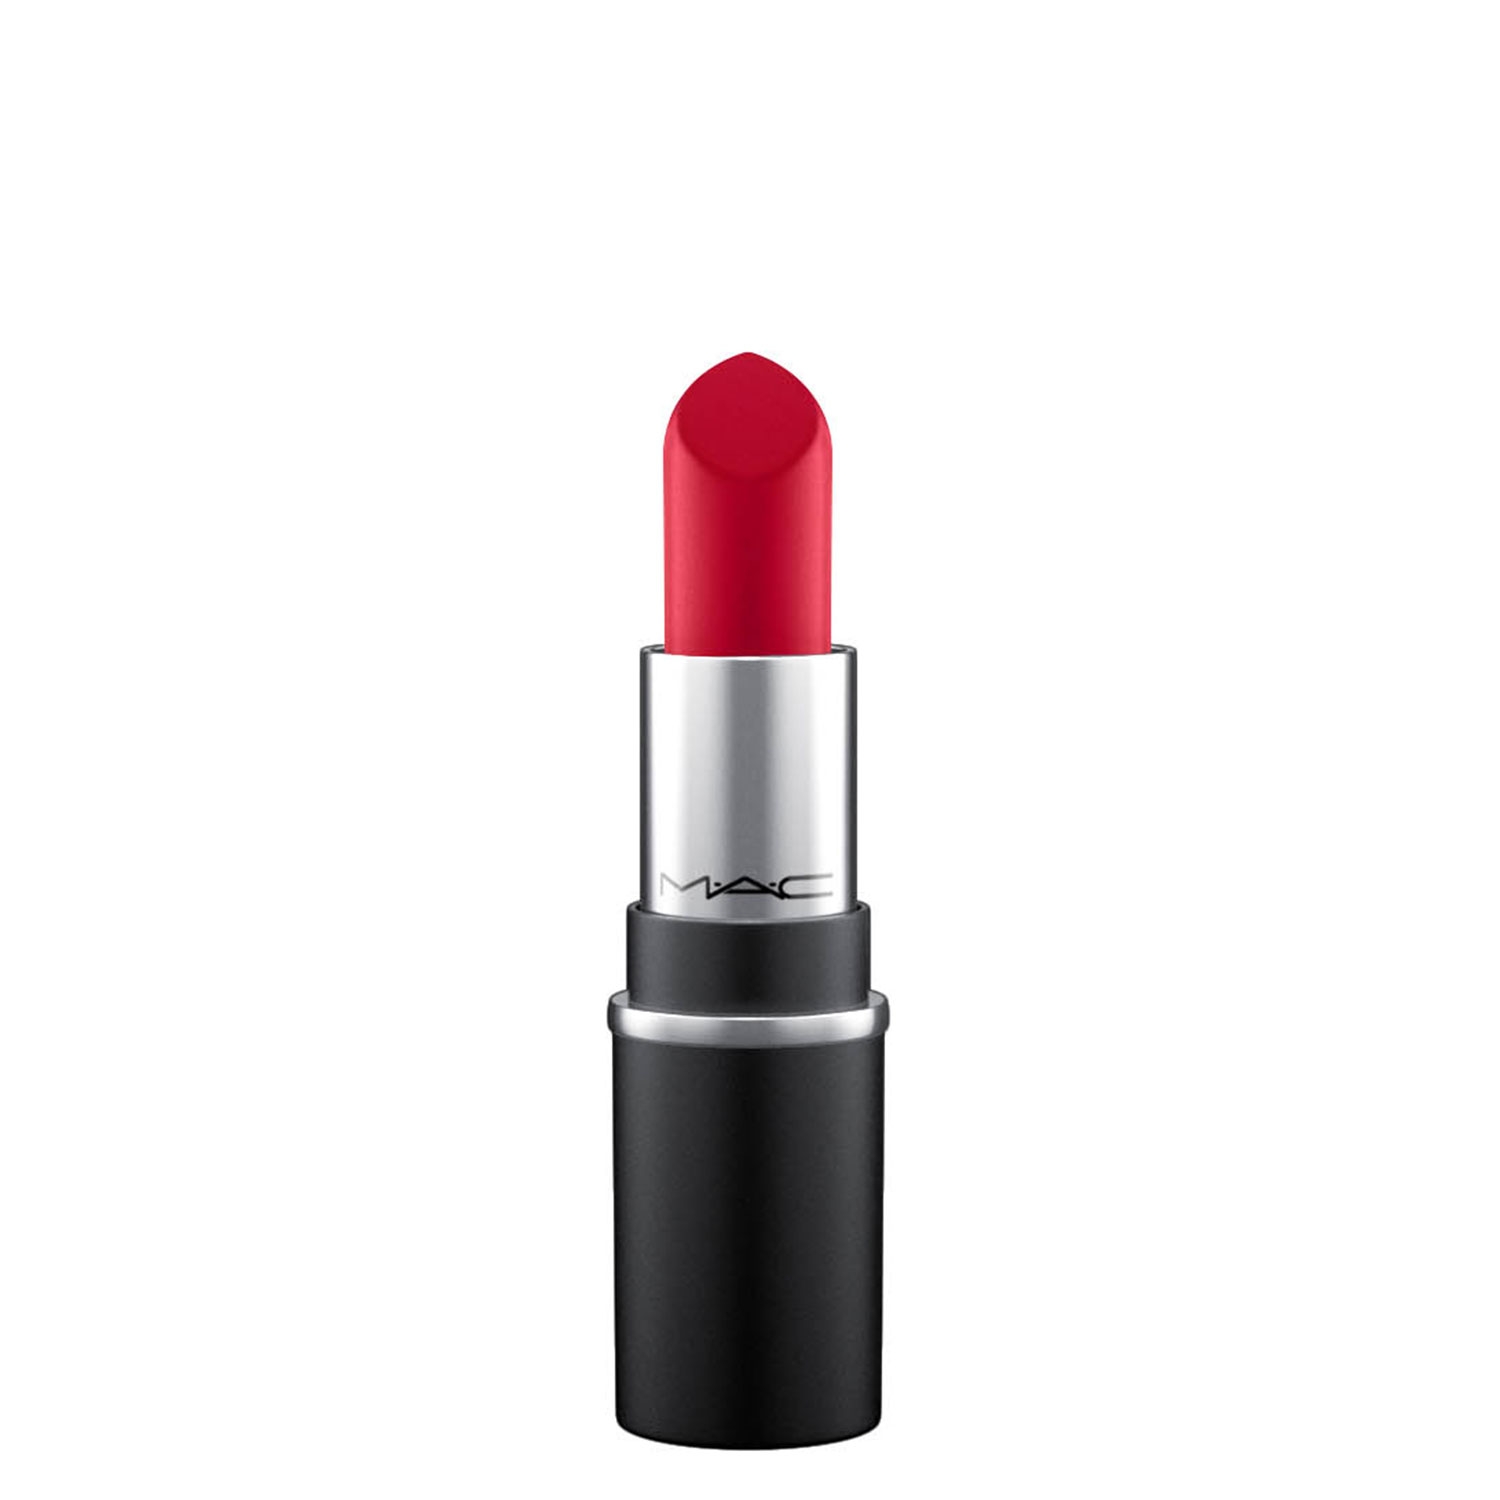 Product image from Little M·A·C - Retro Matte Lipstick Ruby Woo